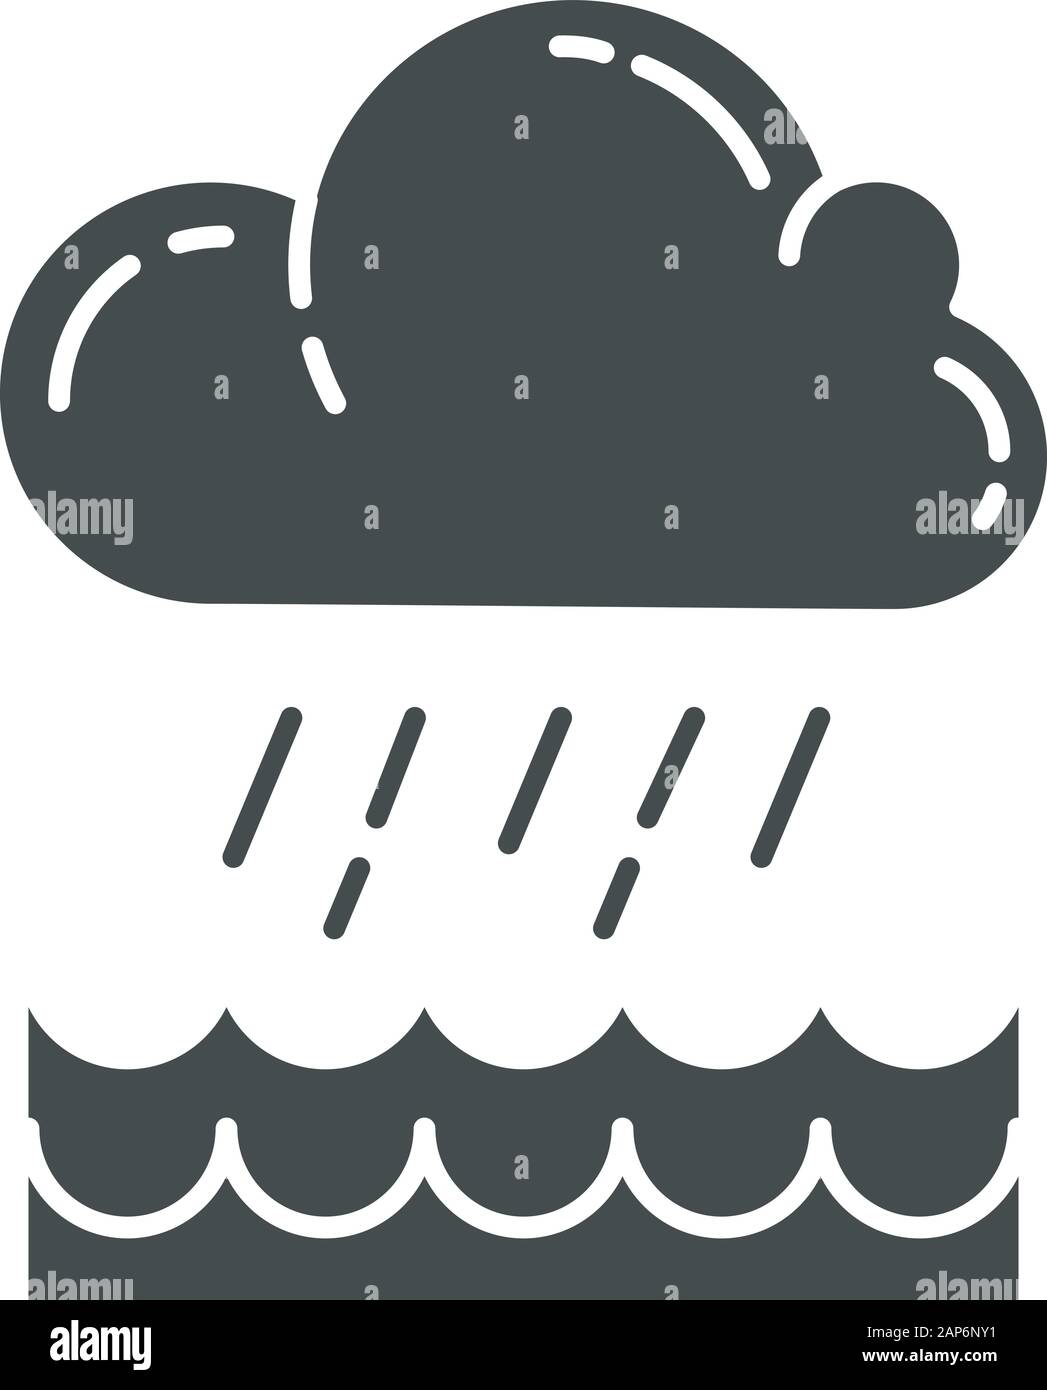 Downpour glyph icon. Cloud, heavy rainfall, incoming water. Rainstorm. Torrential, pouring rain over water. Meteorological phenomenon. Silhouette symb Stock Vector